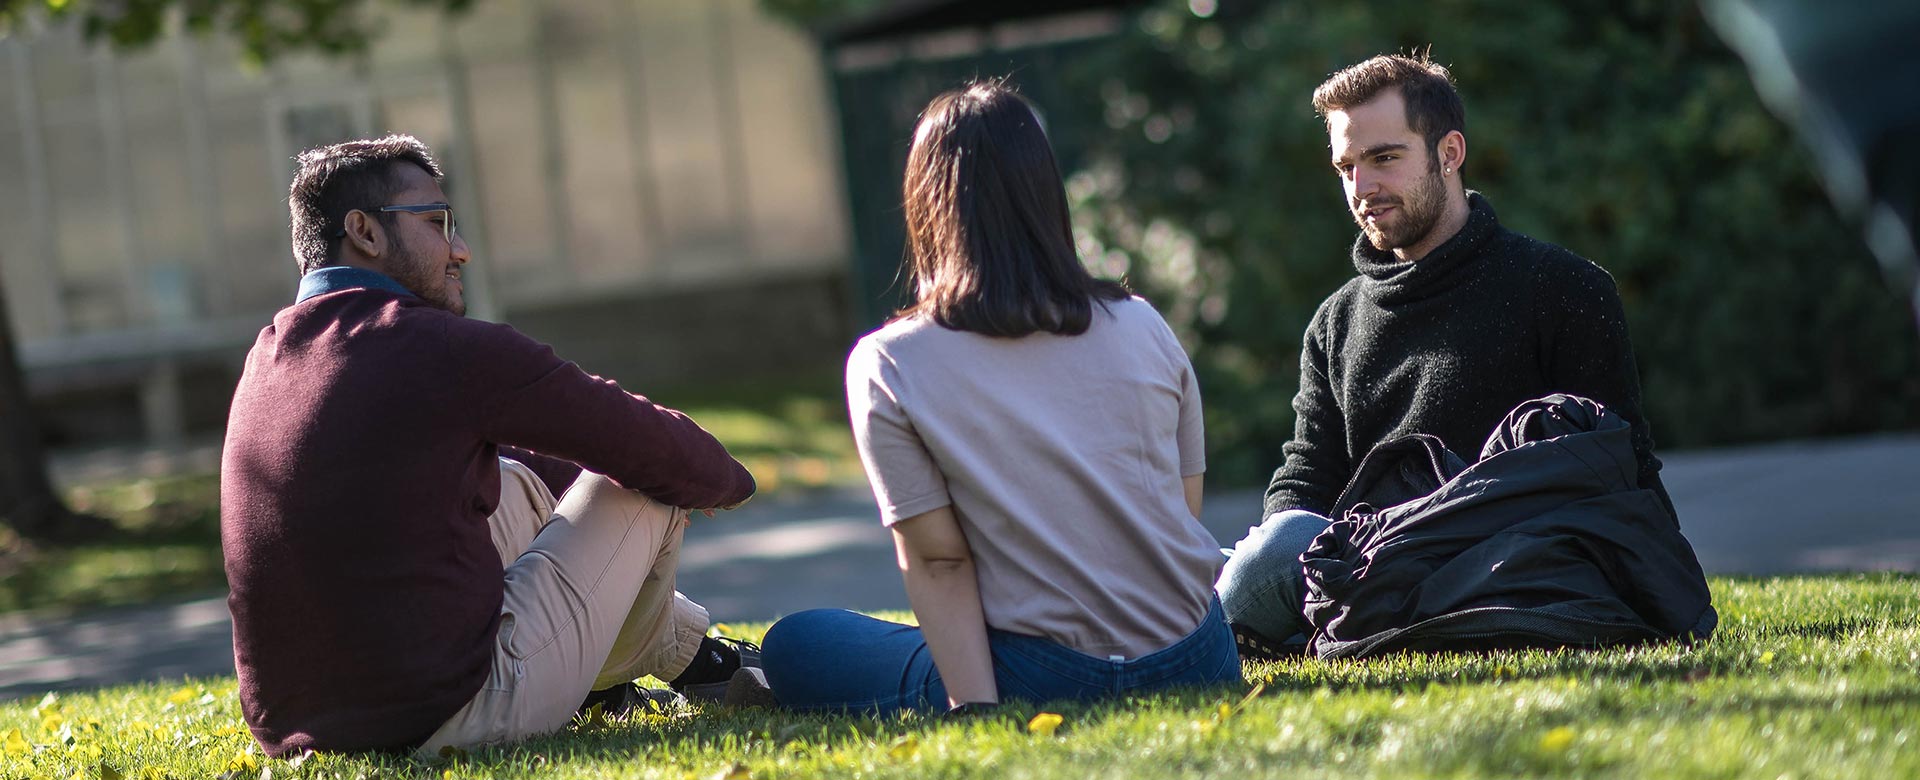 Students sitting on the grass at UBCO campus